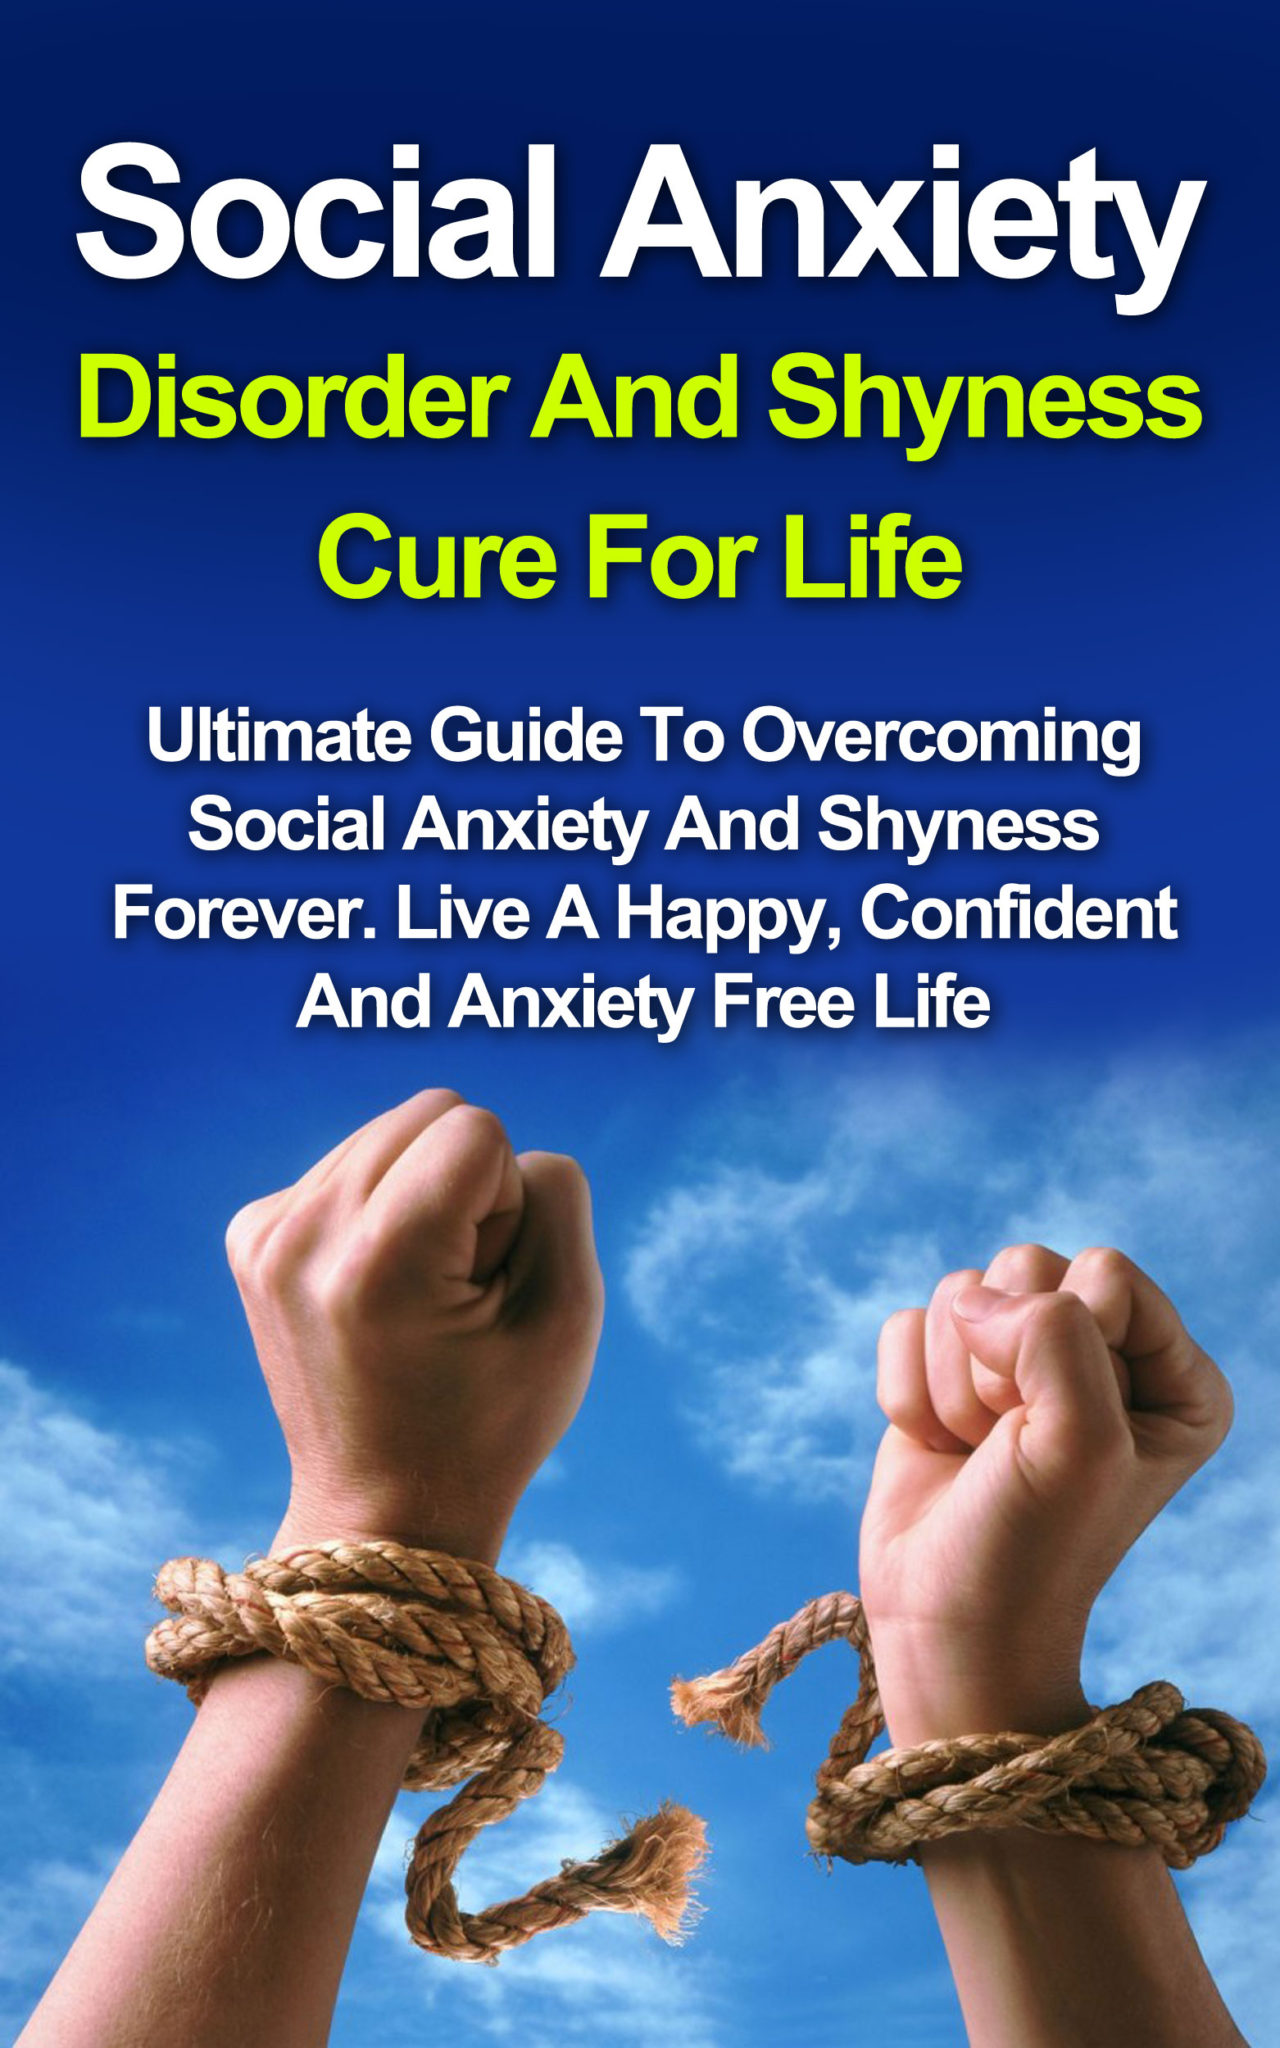 Social Anxiety Disorder And Shyness Cure For Life: Ultimate Guide to Overcoming Social Anxiety and Shyness Forever. Be Happy, Confident and Anxiety Free by Shafiek Joseph